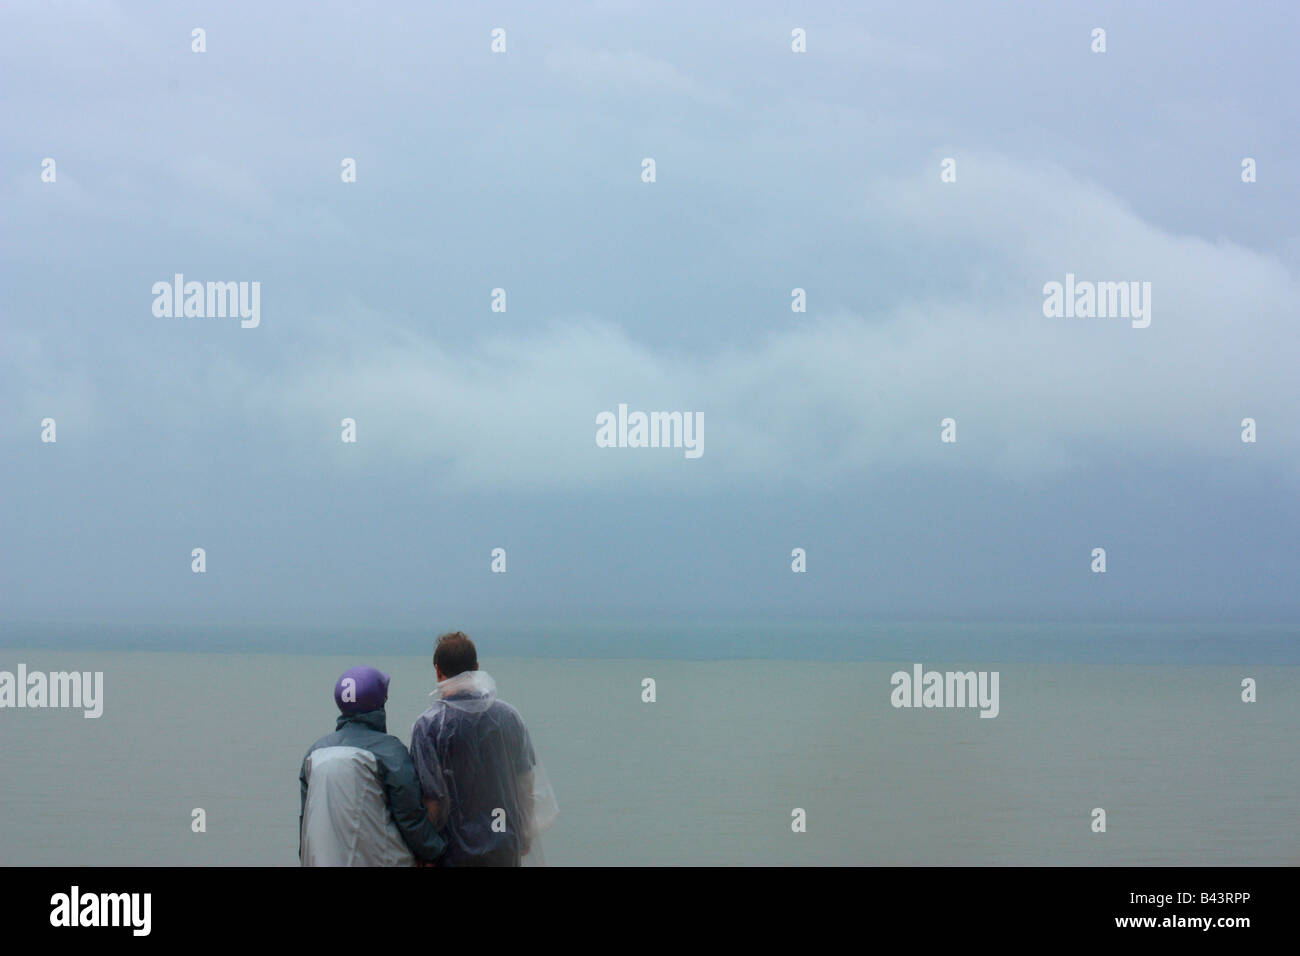 A couple looks out to sea in rainy weather. Stock Photo